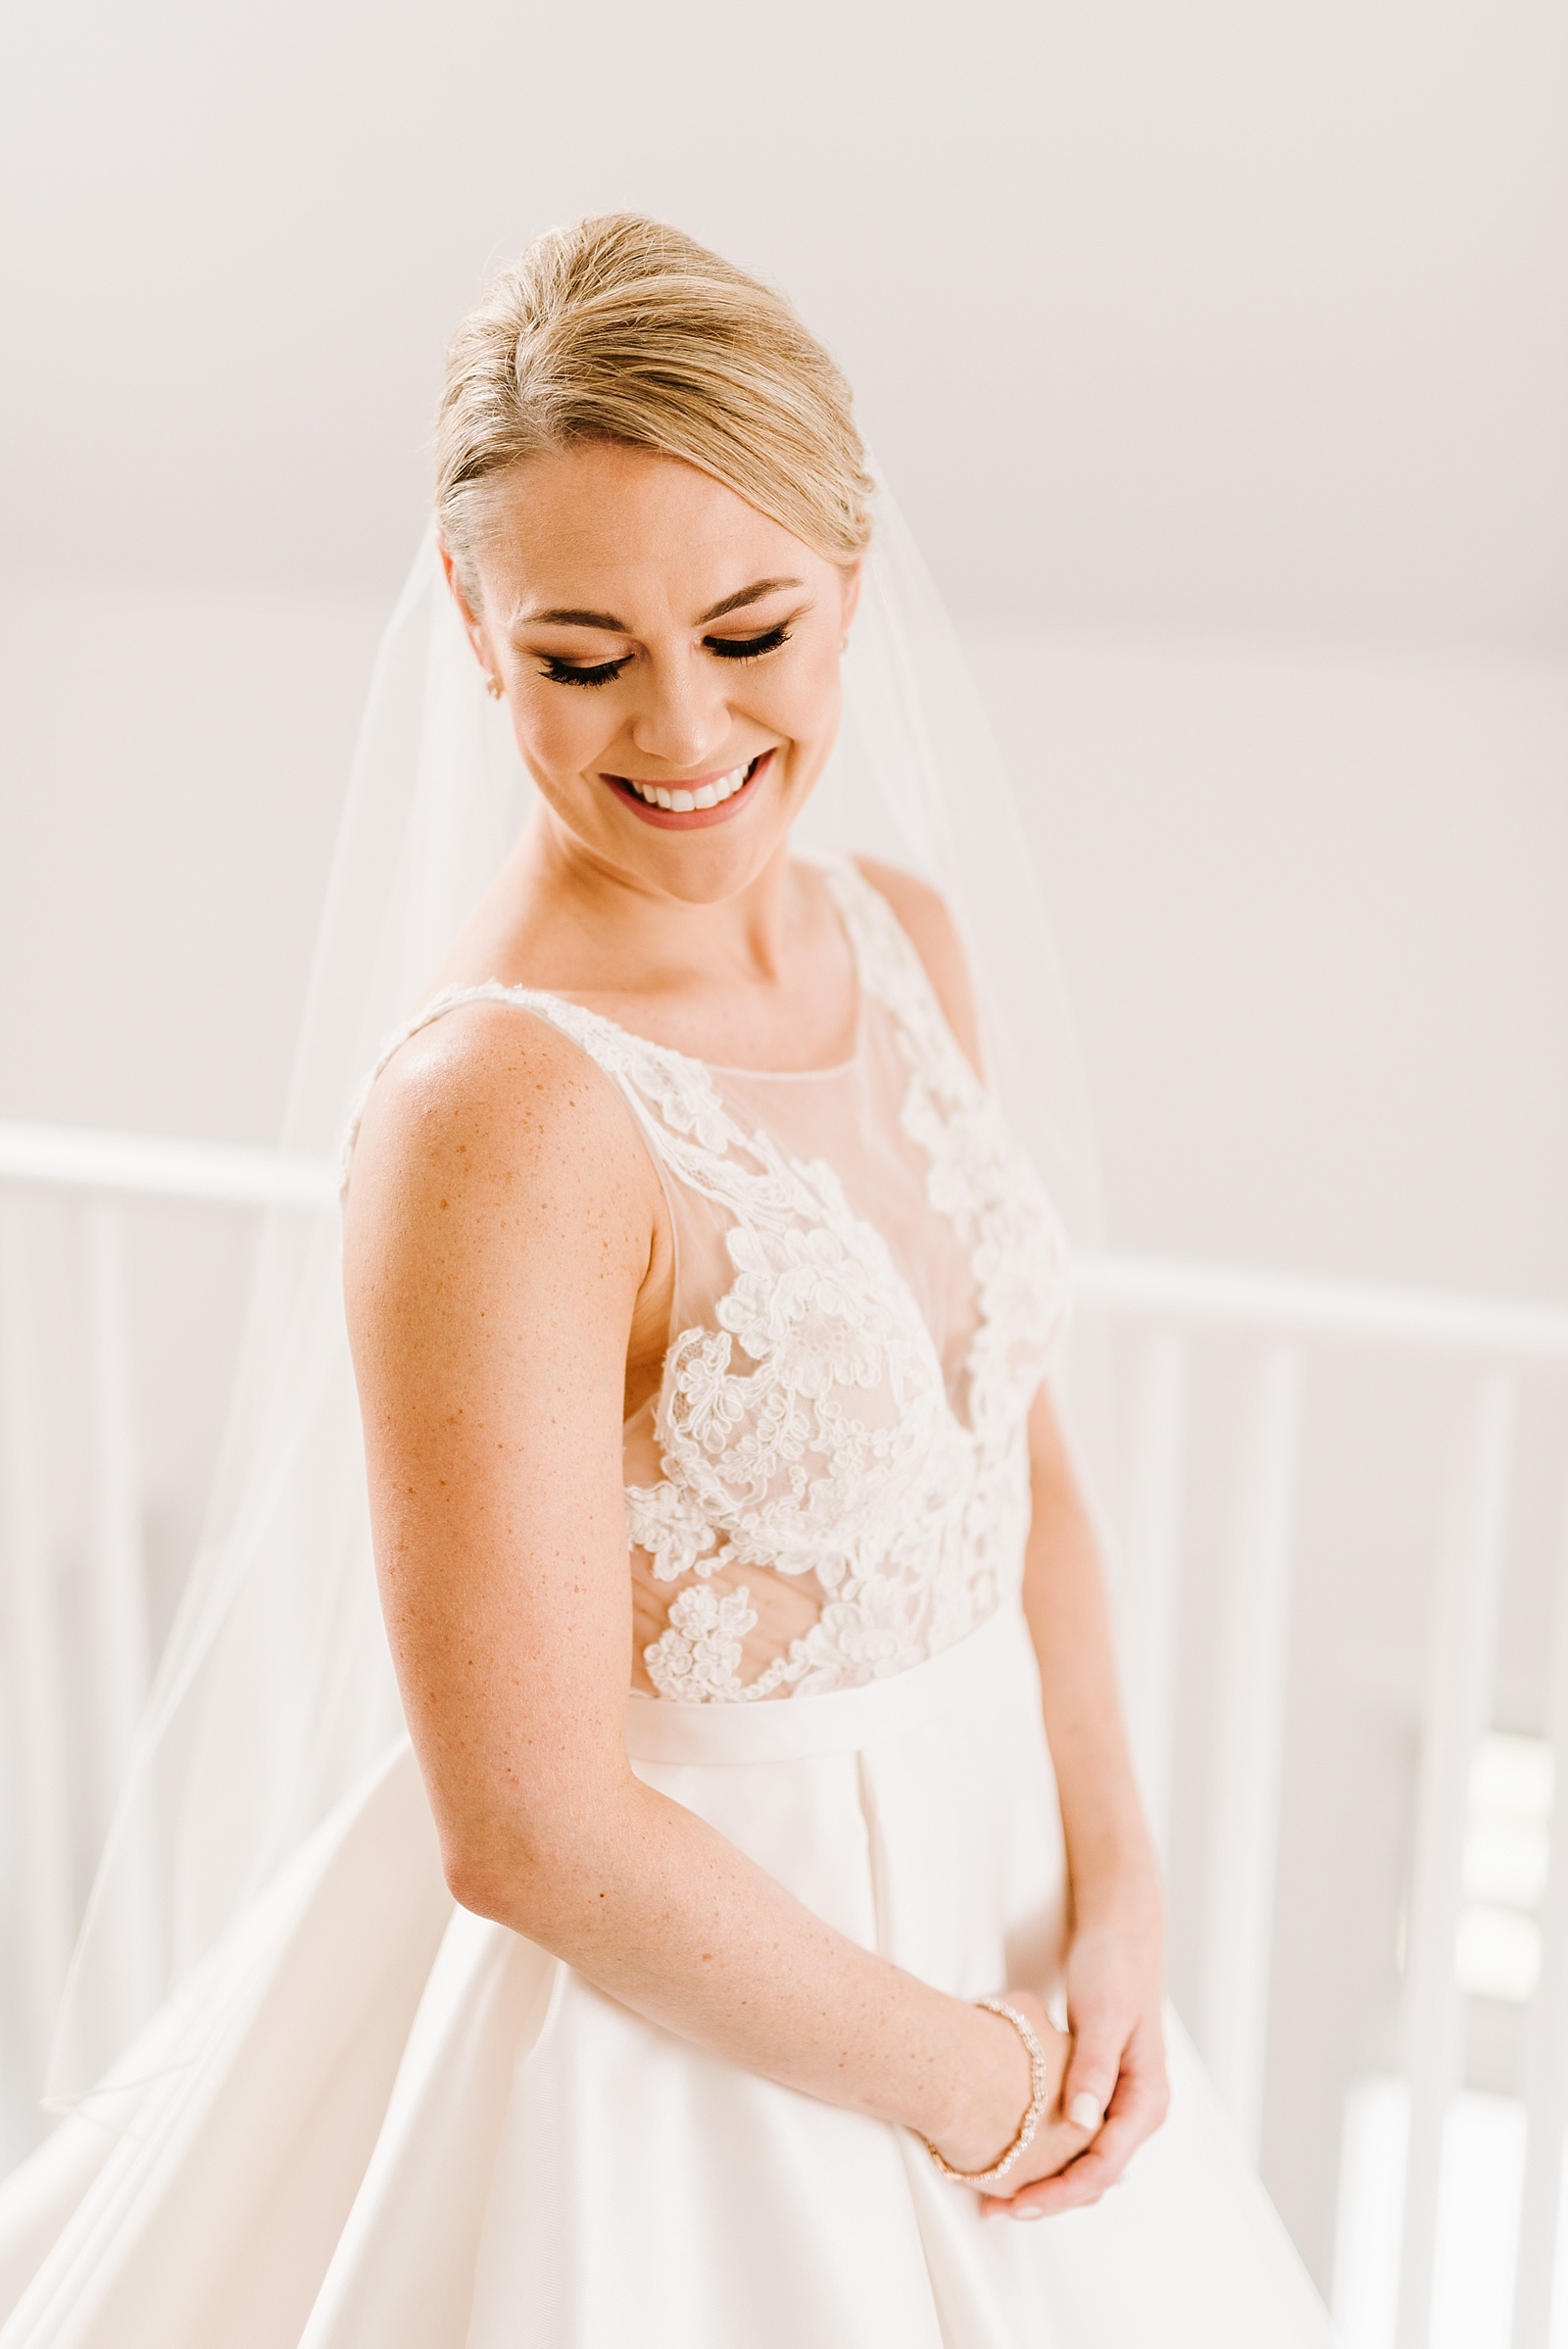 Sunny Summer Wedding at Viewpoint Hotel in York, Maine by Boston Wedding Photographer Annmarie Swift